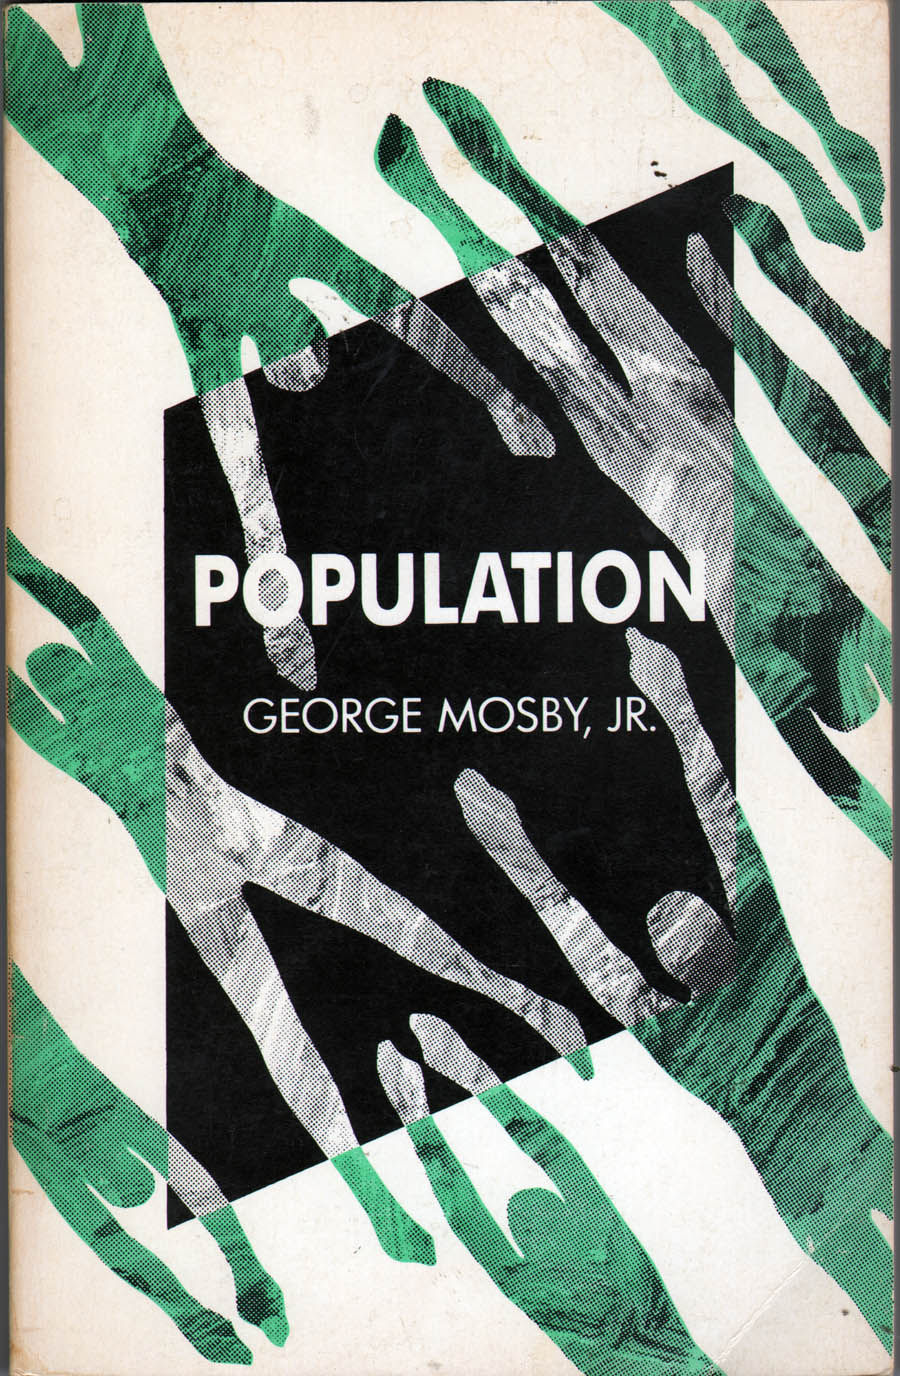 Population: Poems by George Mosby, Jr.